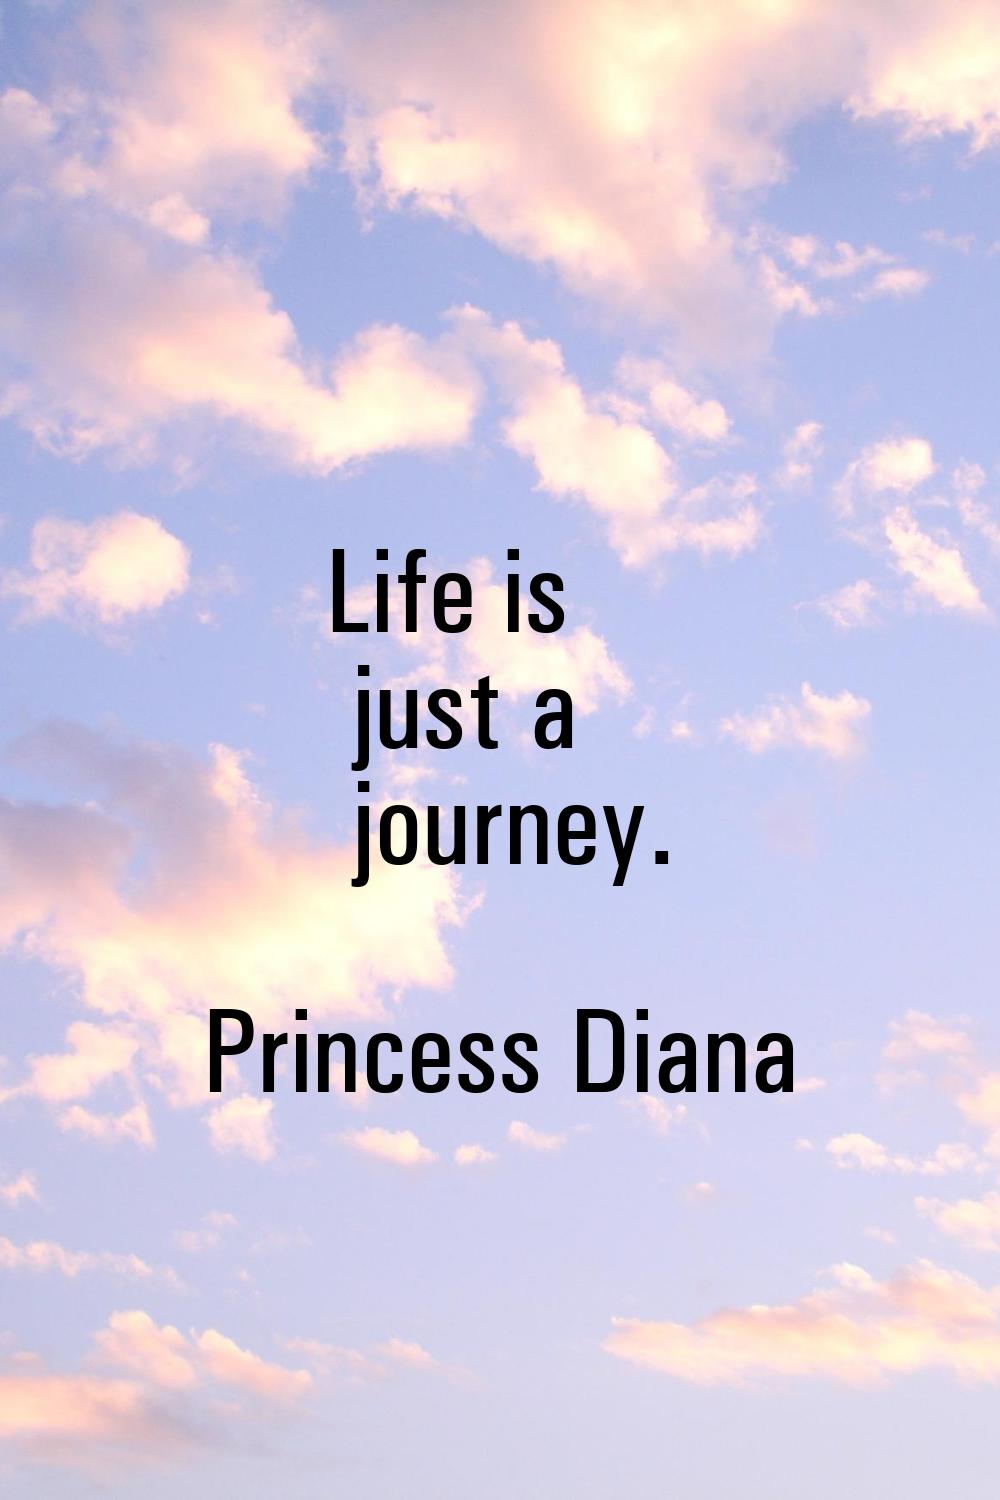 Life is just a journey.